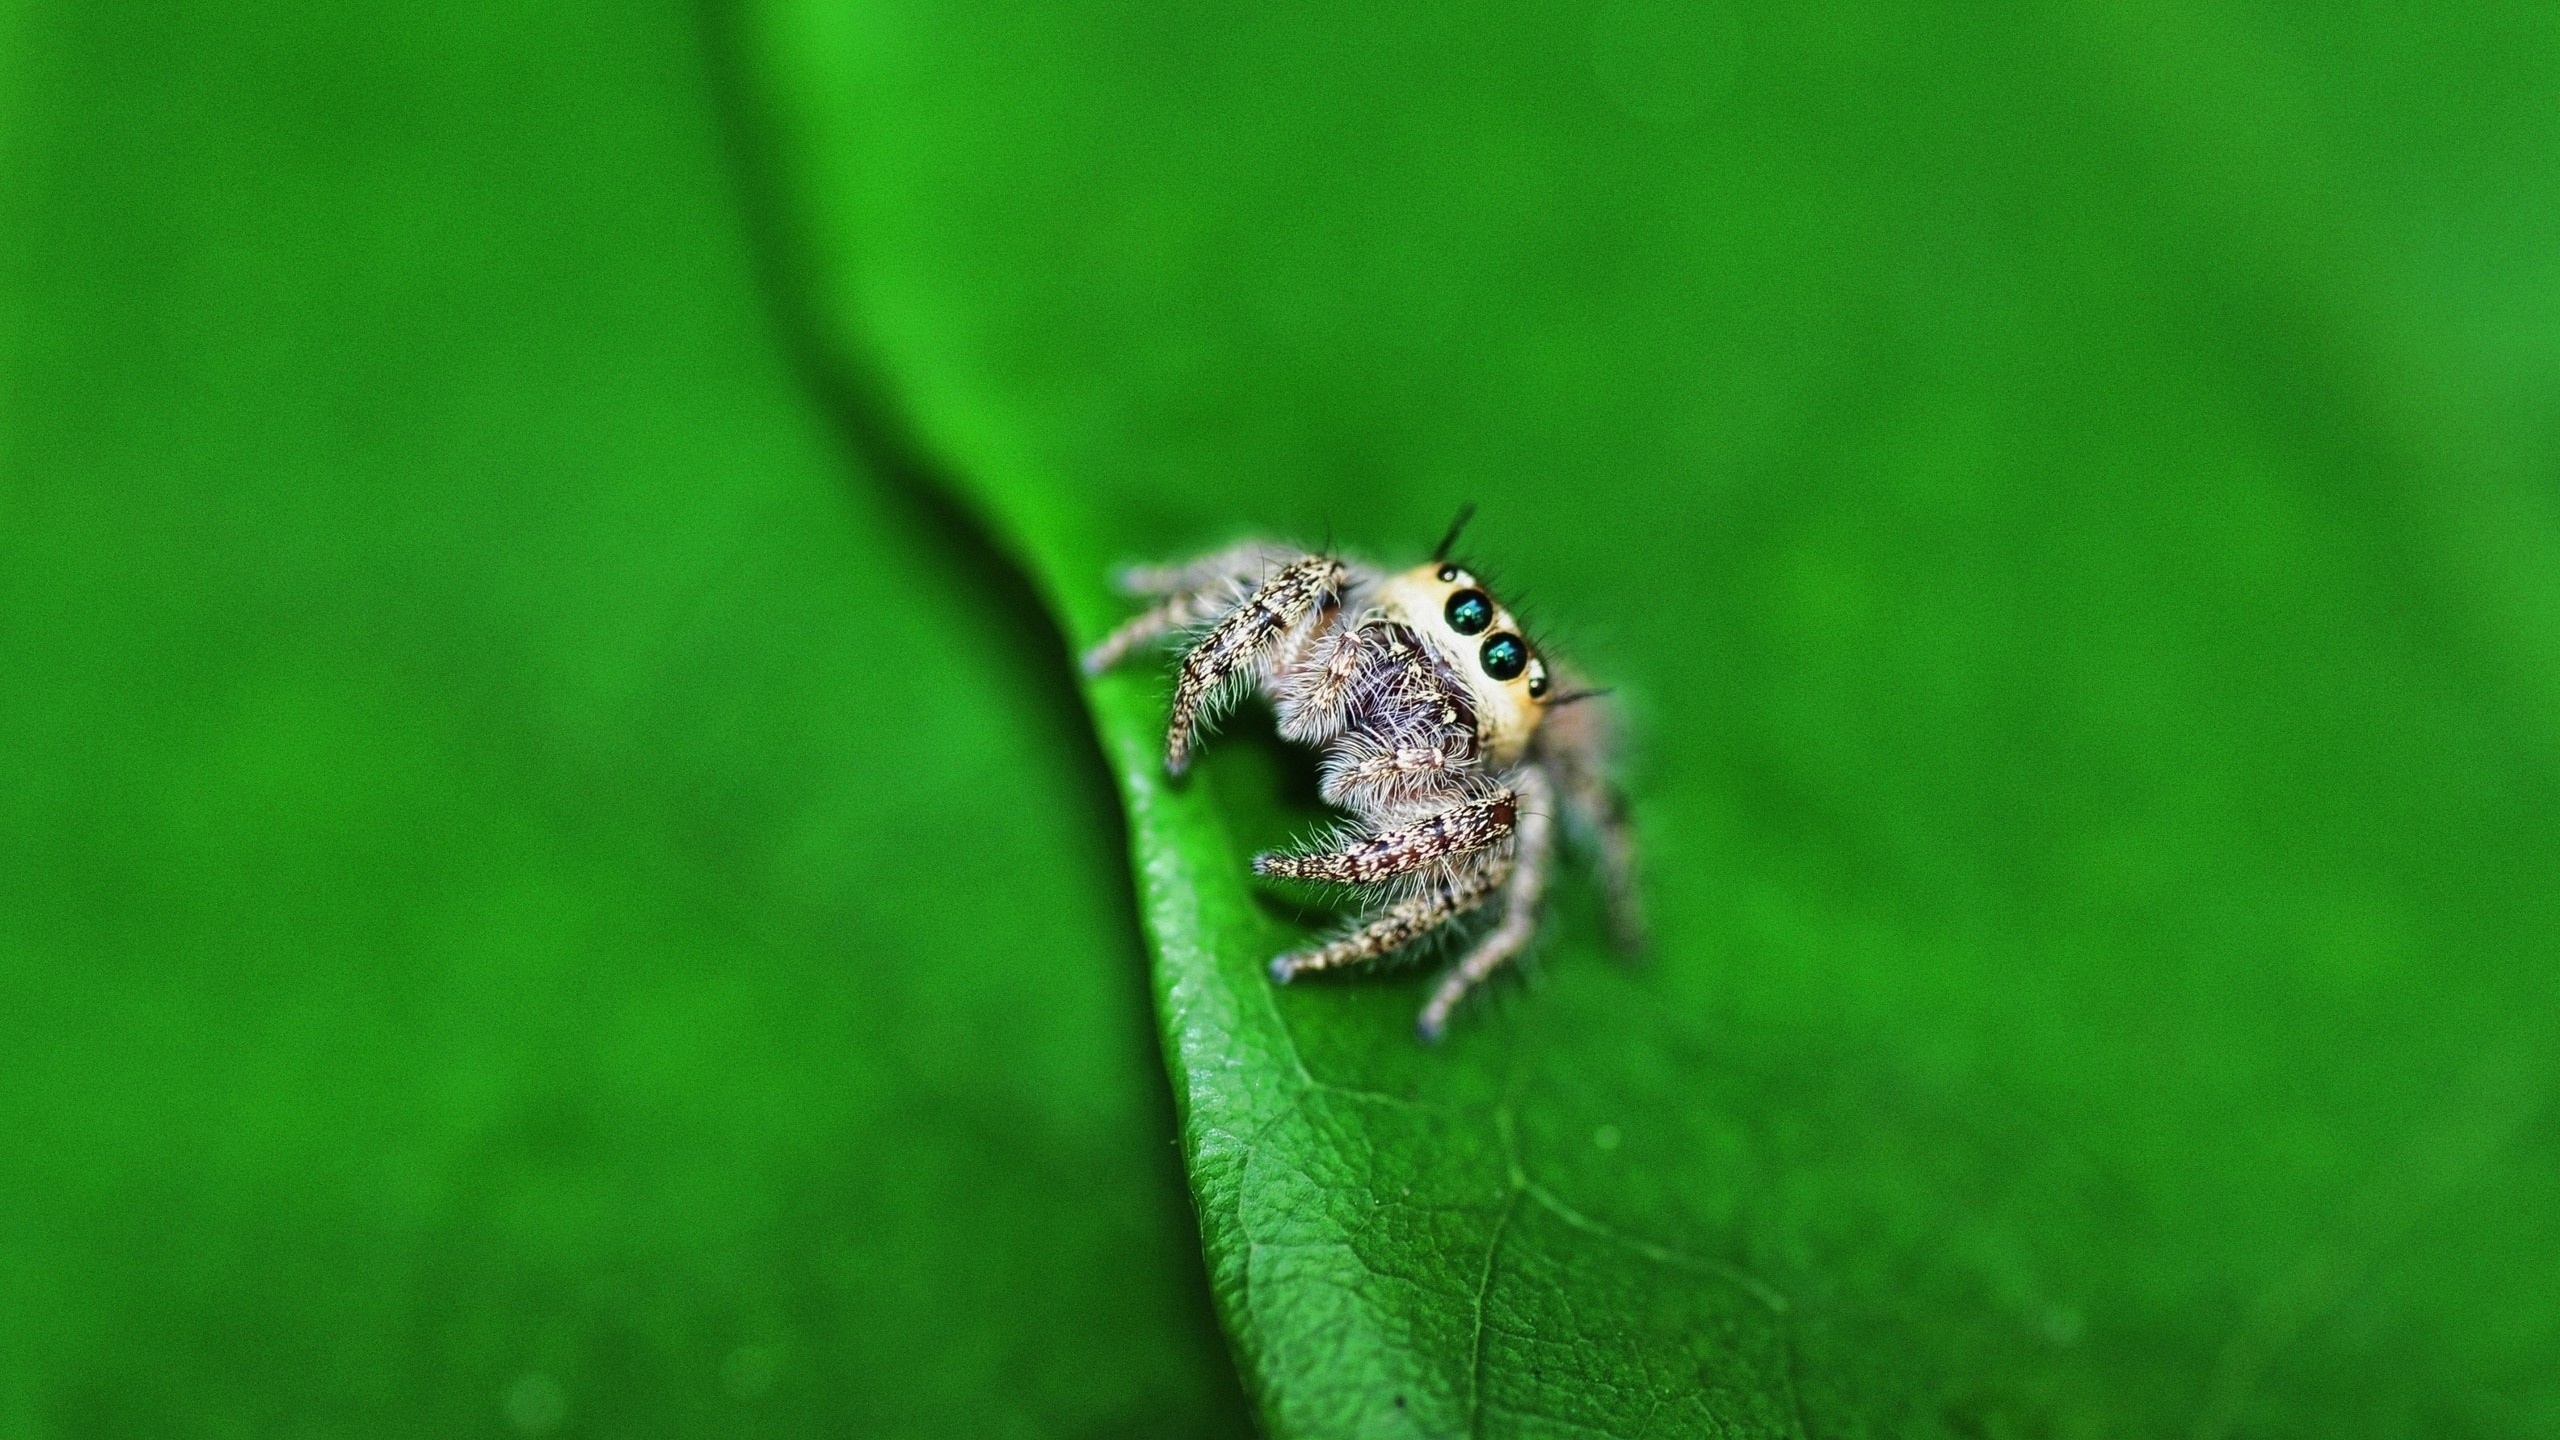 Jumping spider collection, Spider wallpapers, Rapid movement, Acrobatic arachnids, 2560x1440 HD Desktop